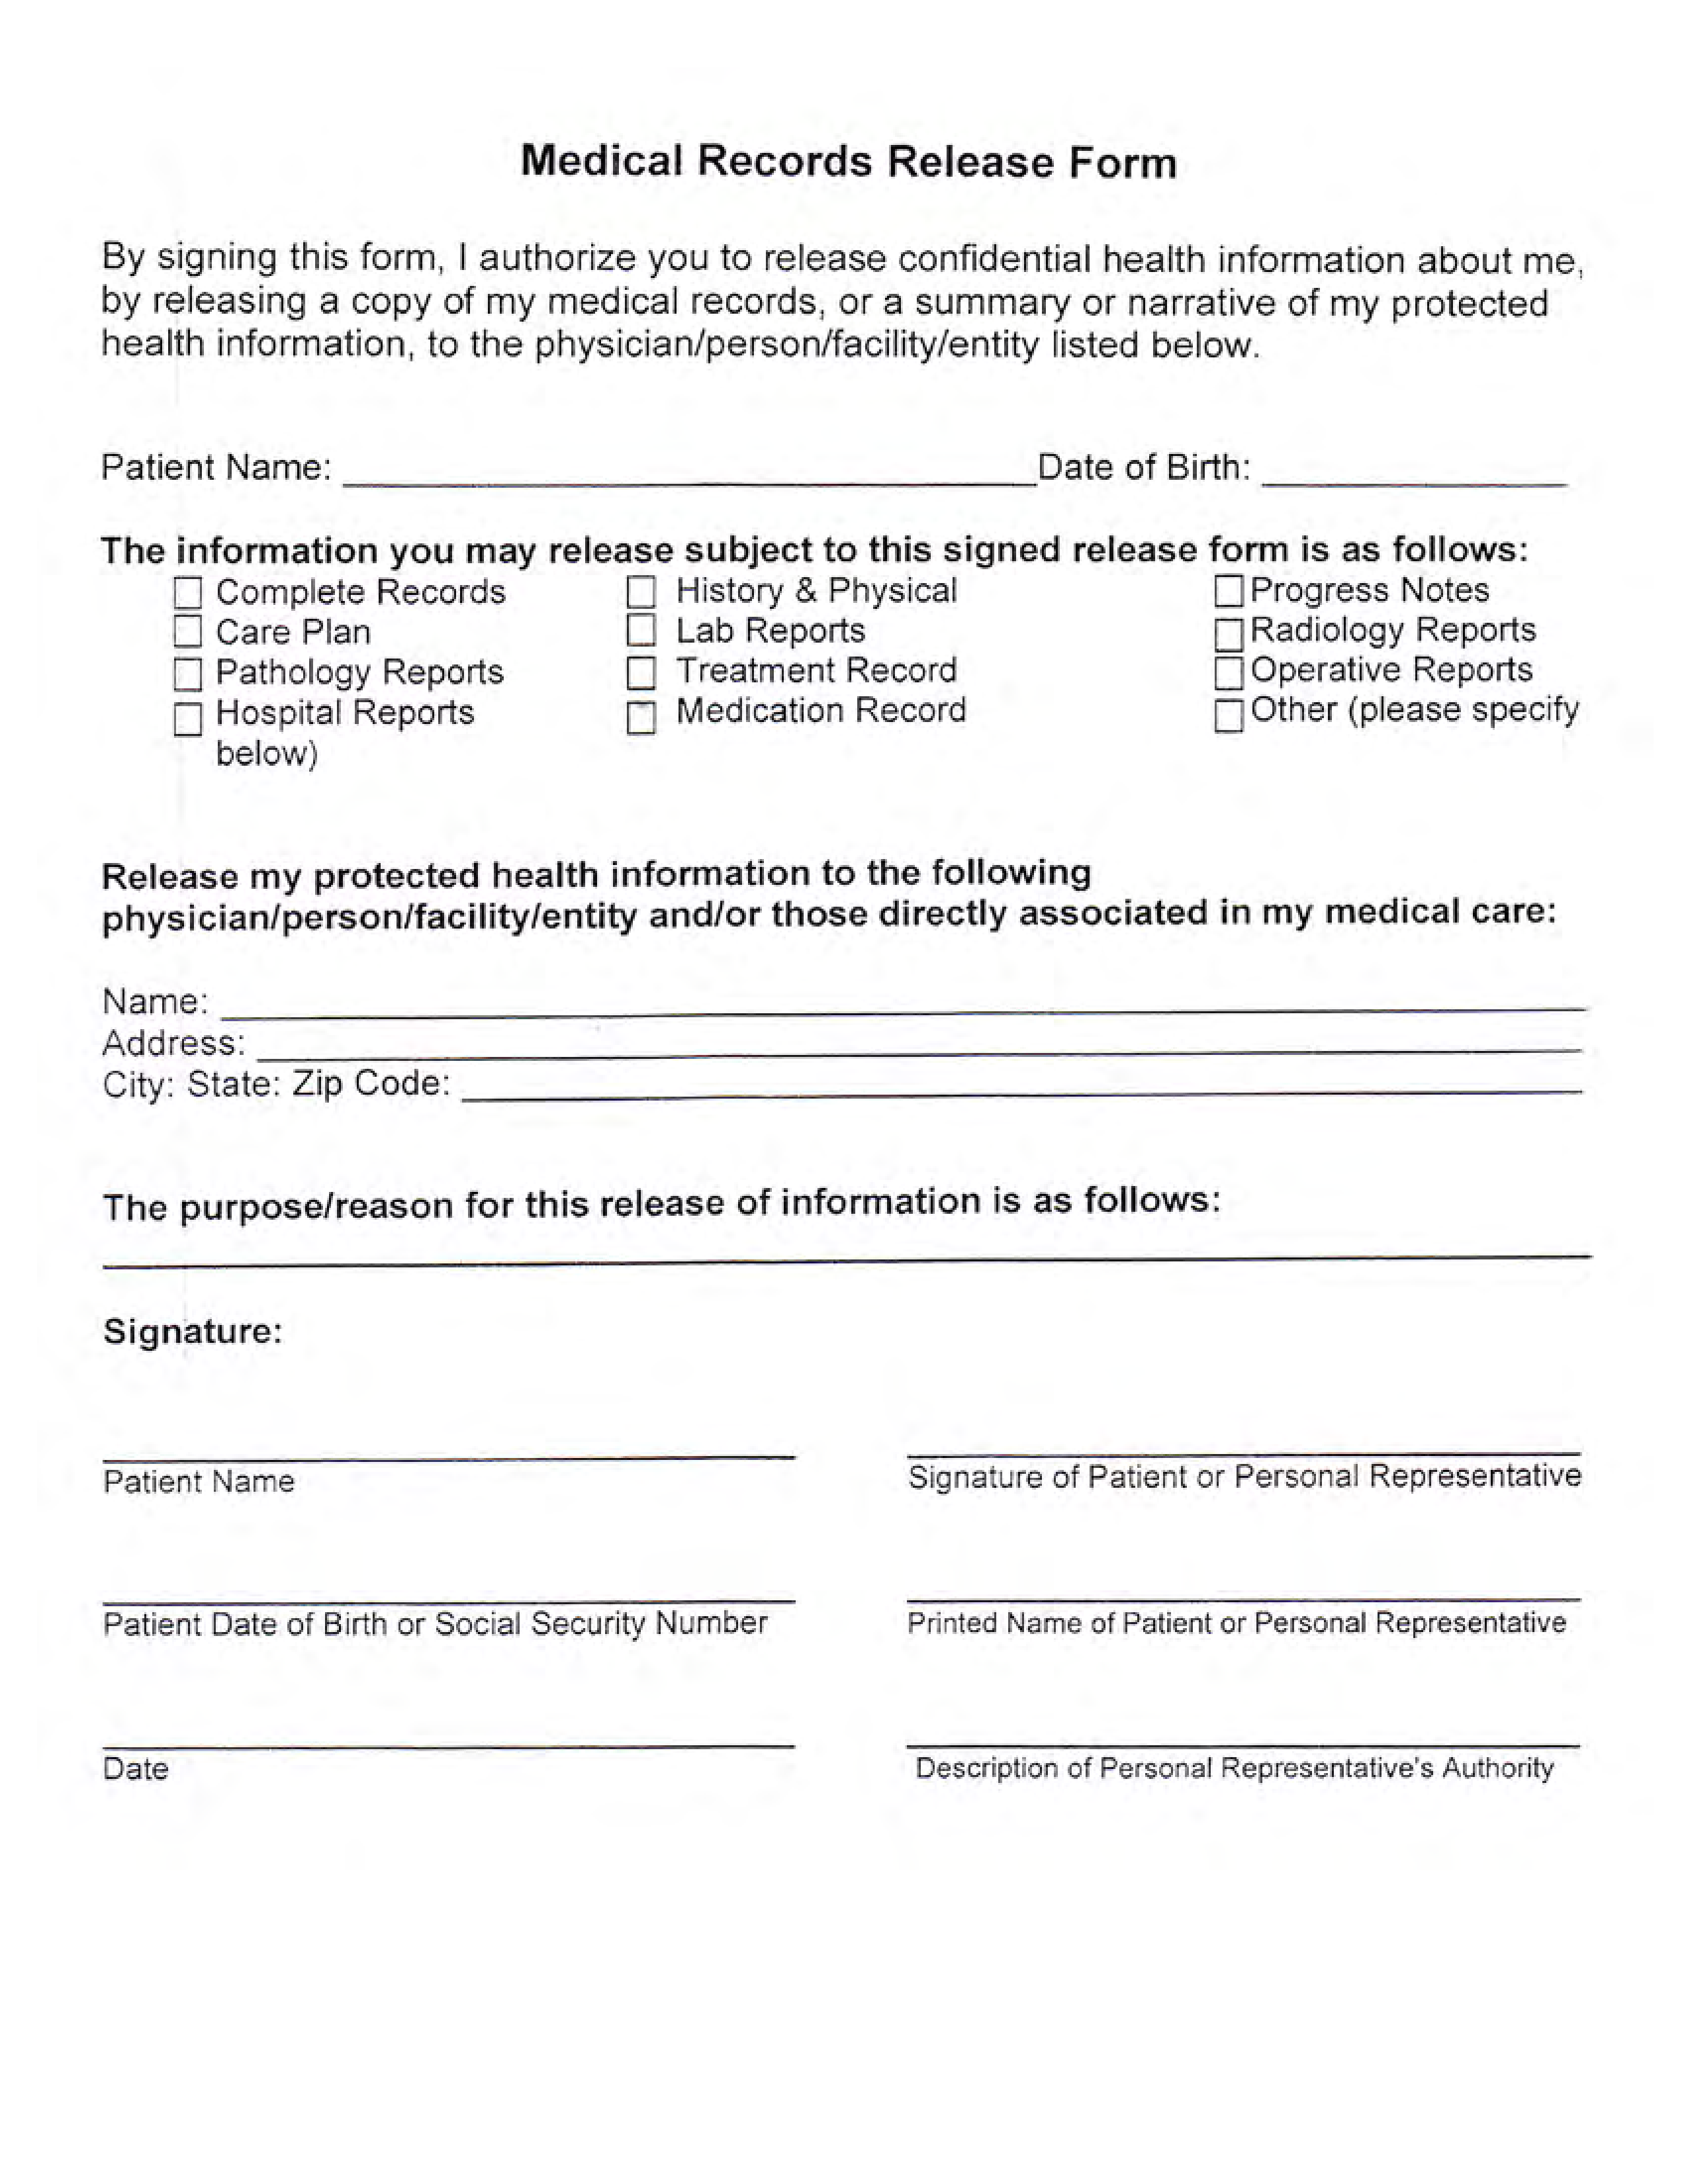 Medical Records Release Form Printable 8545